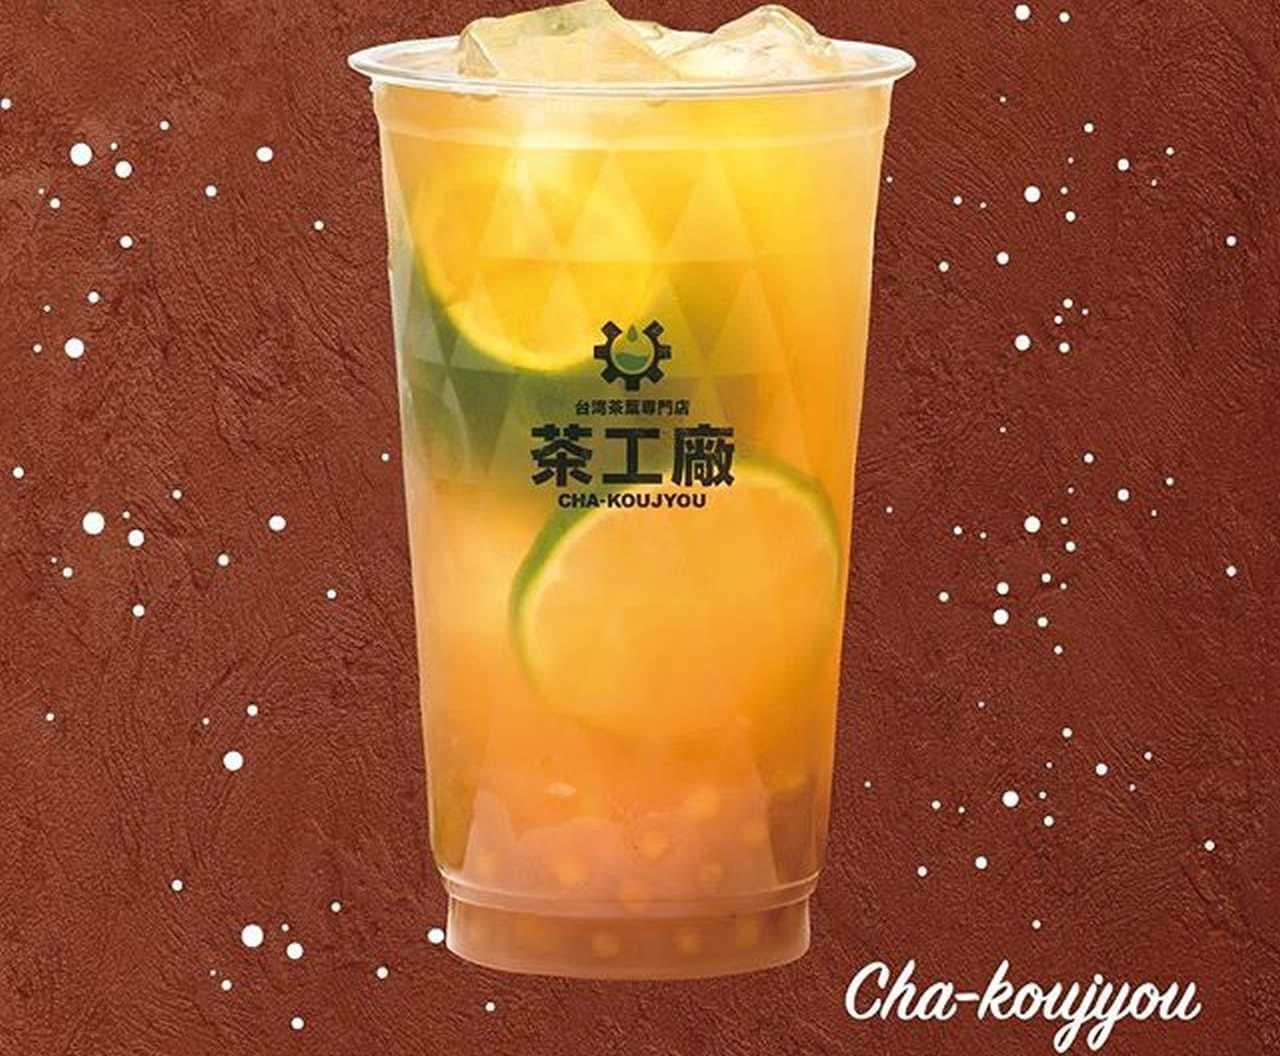 Appeared in "Marugoto Fruit Tea", a tapioca drink containing 1 fruit, and "Tea Factory" in Jiyugaoka